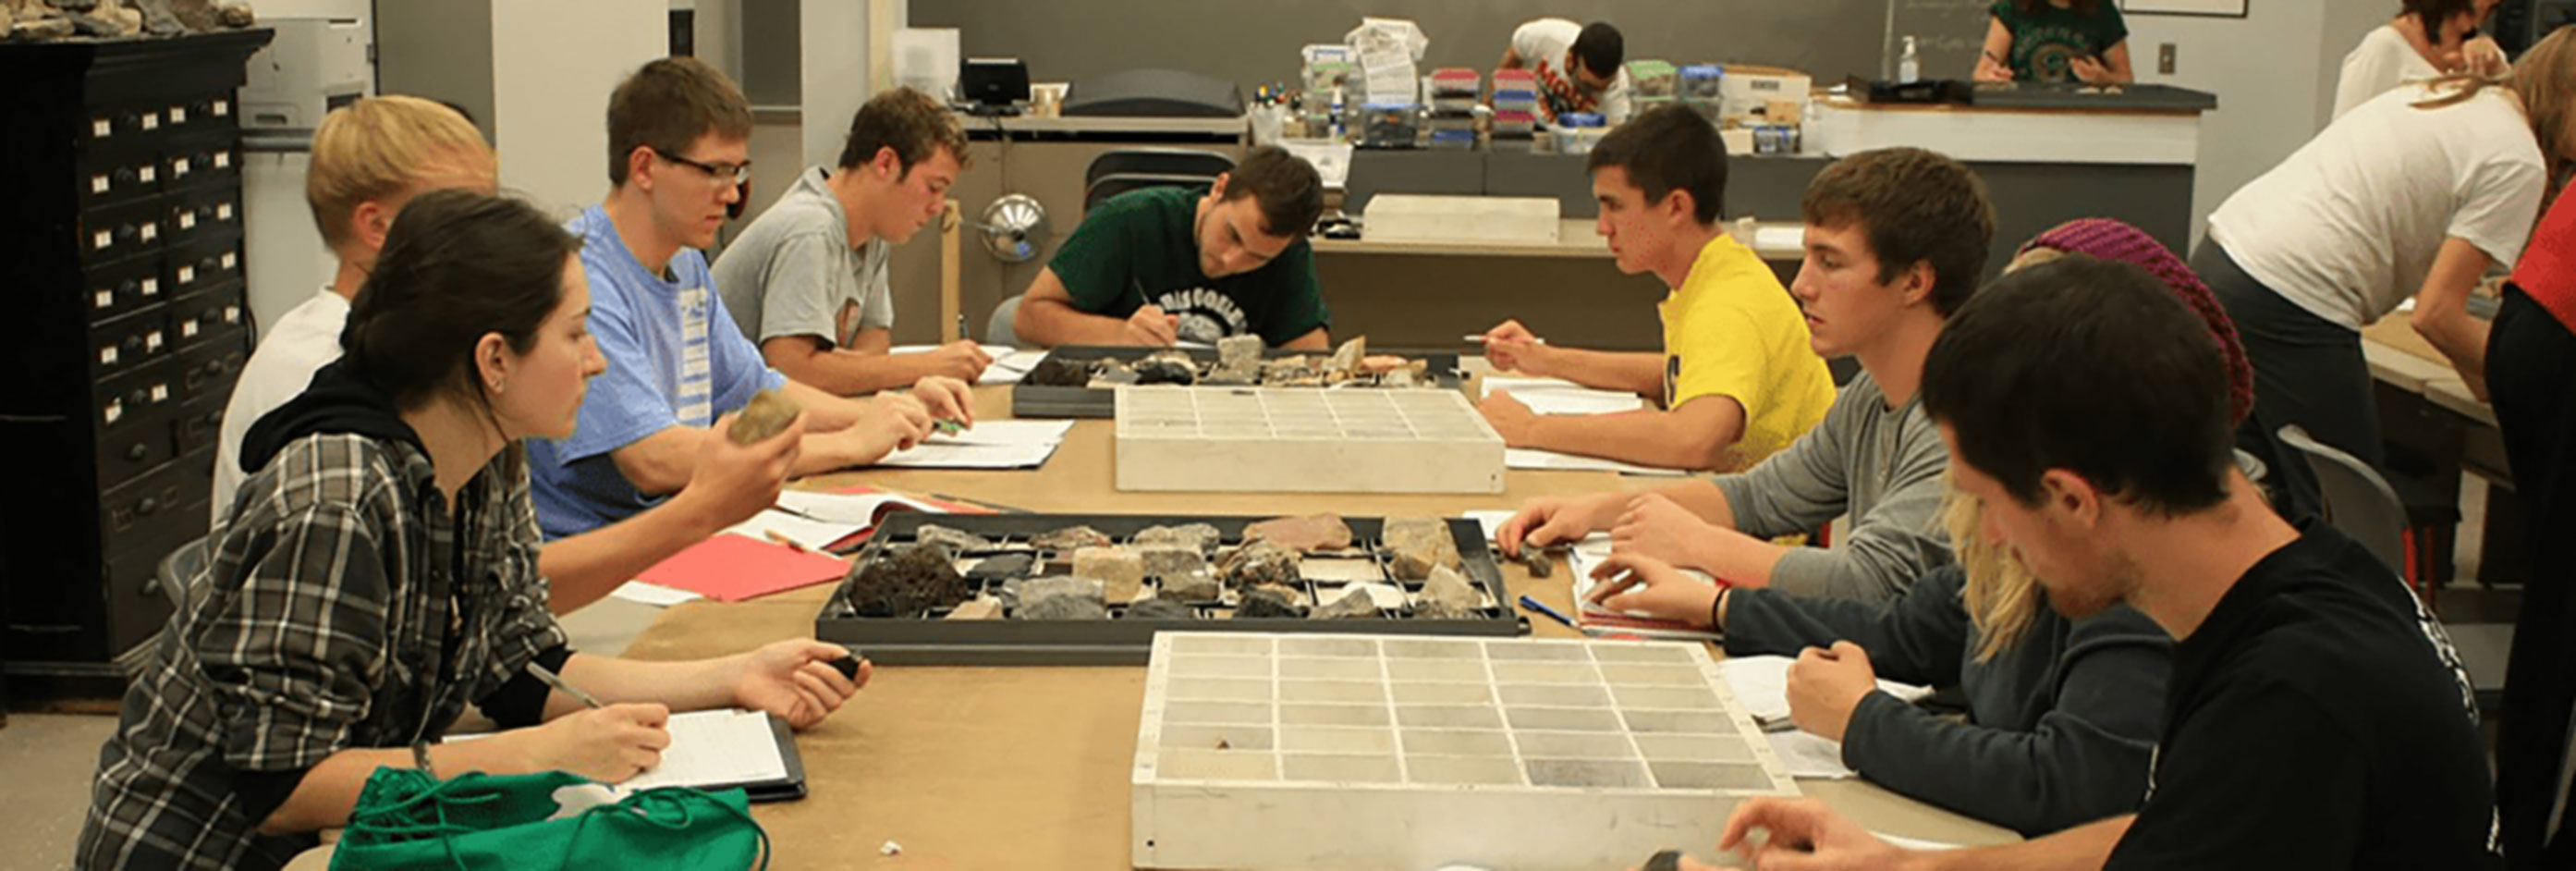 Students with sample rocks on a table experimenting.